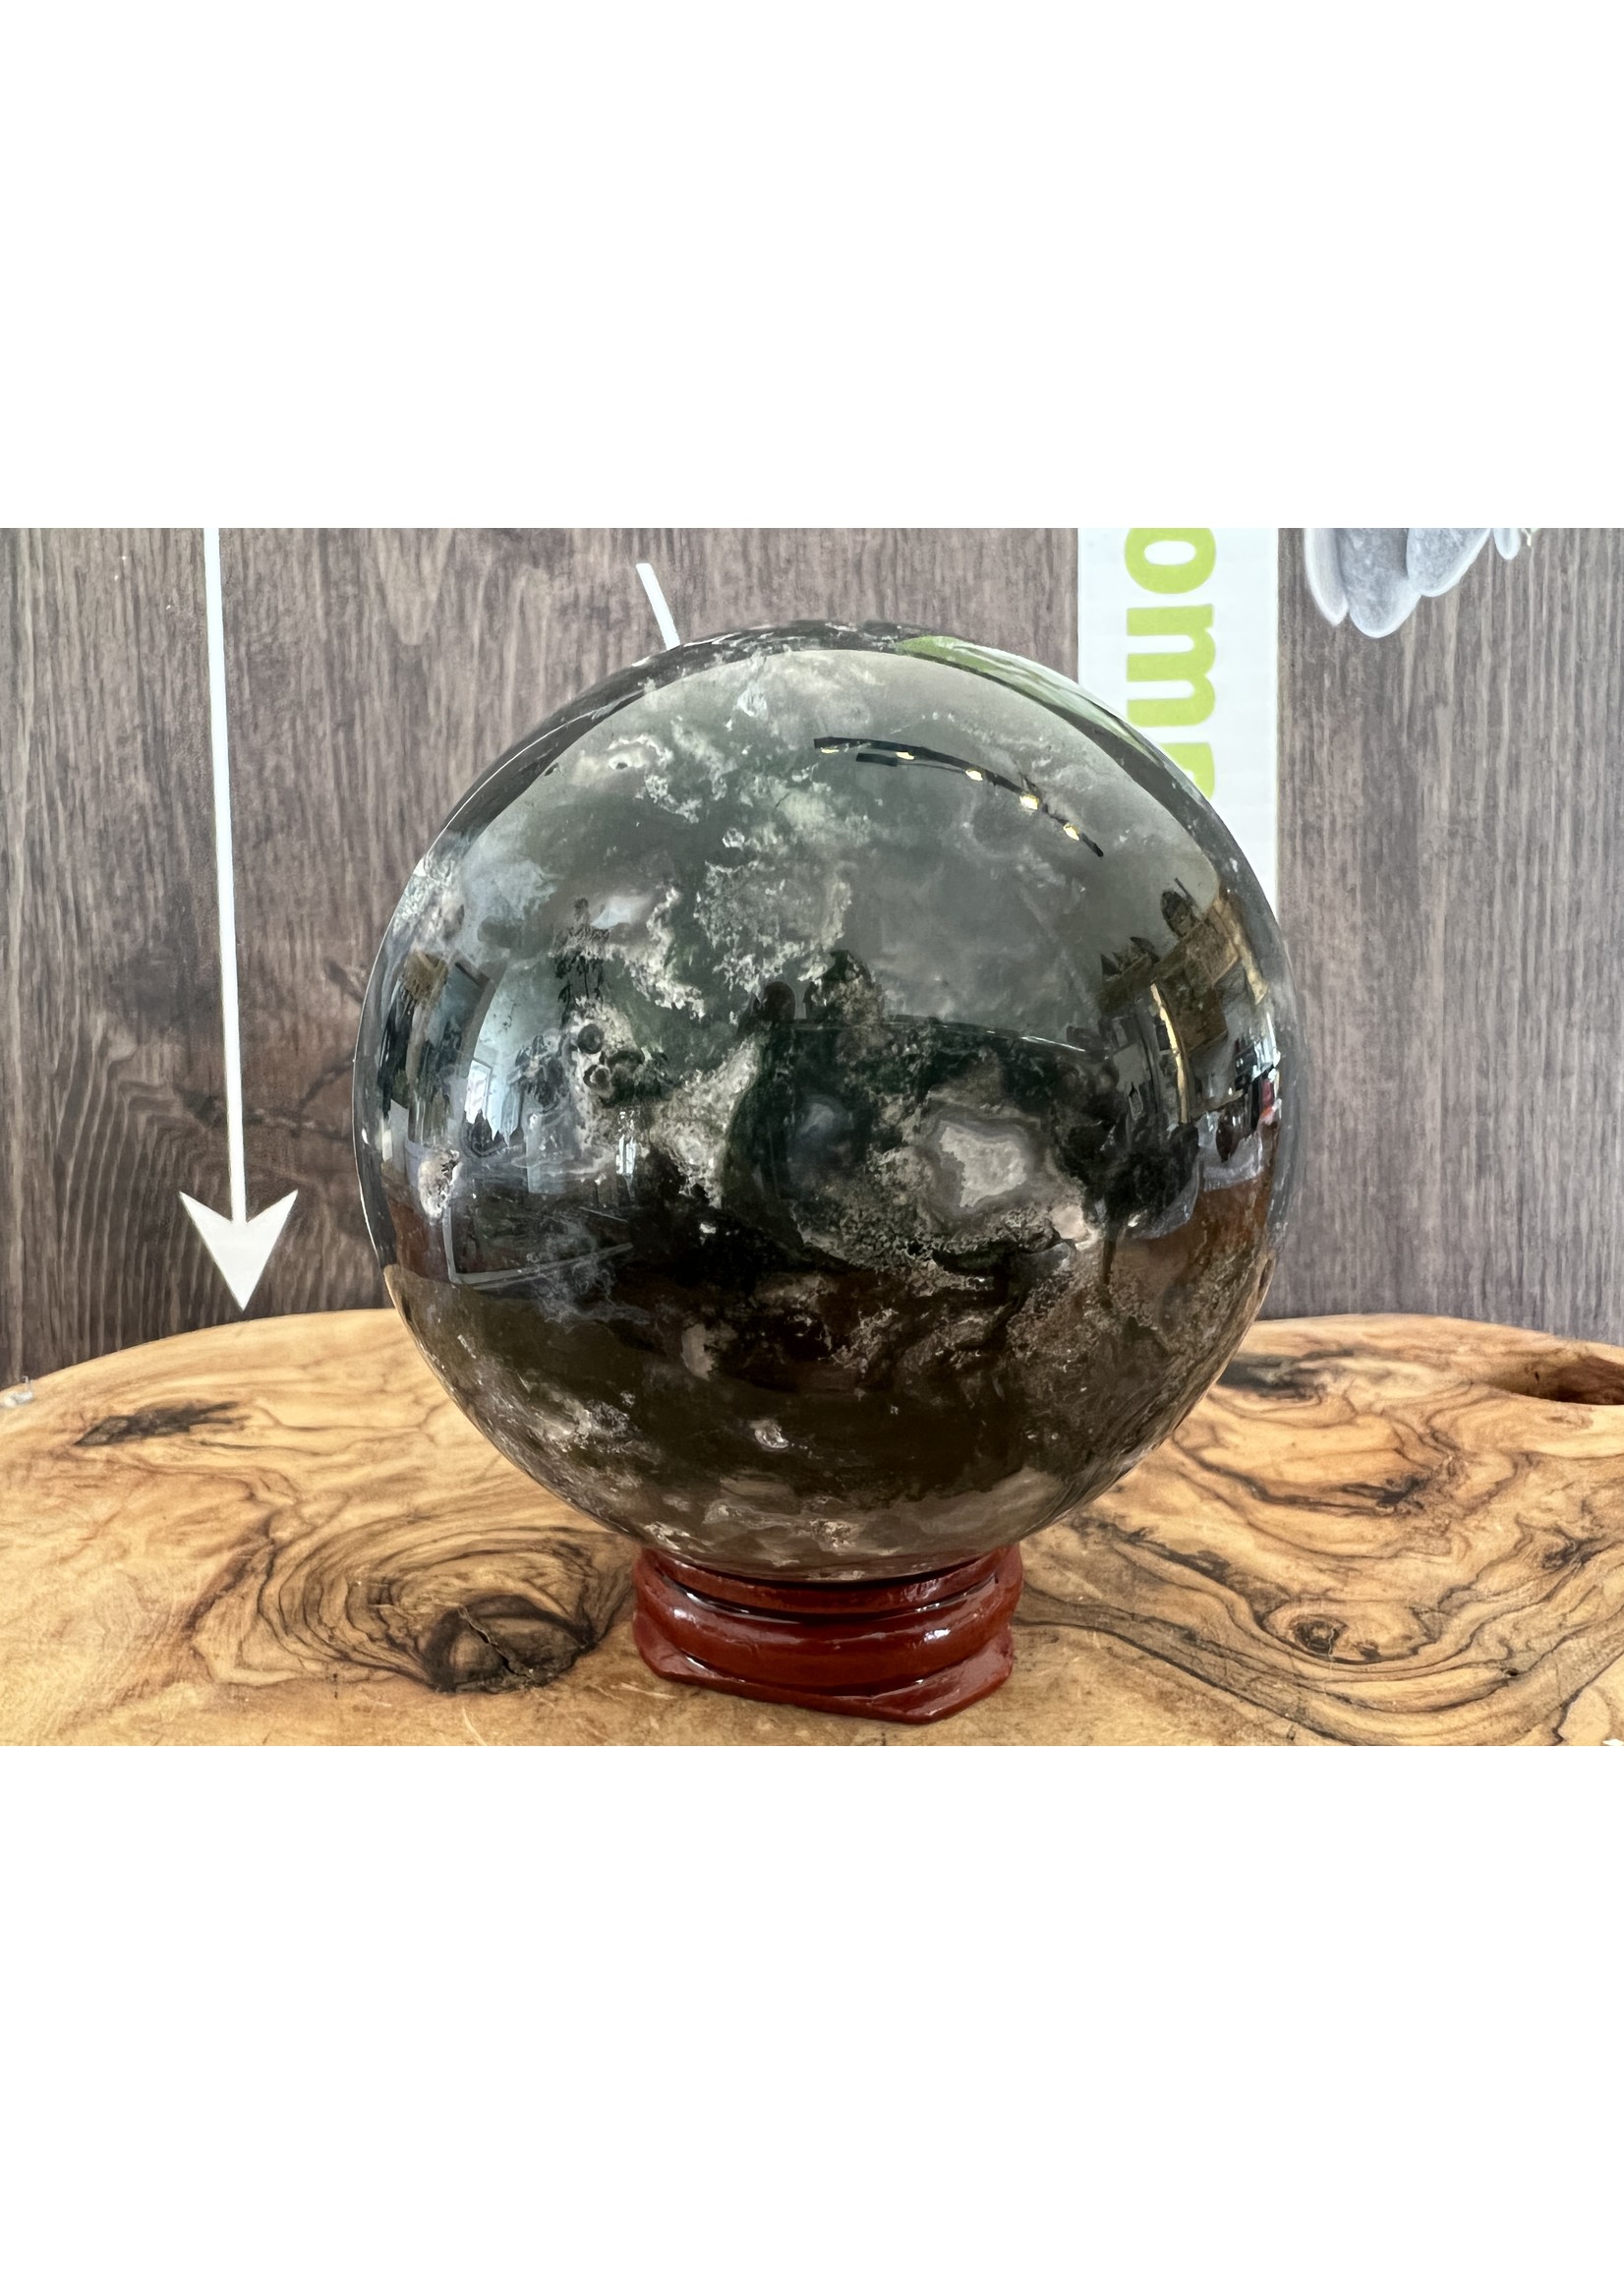 large magnificent moss agate sphere, awakens sensitivity and joy, attracts balance peace and quiet